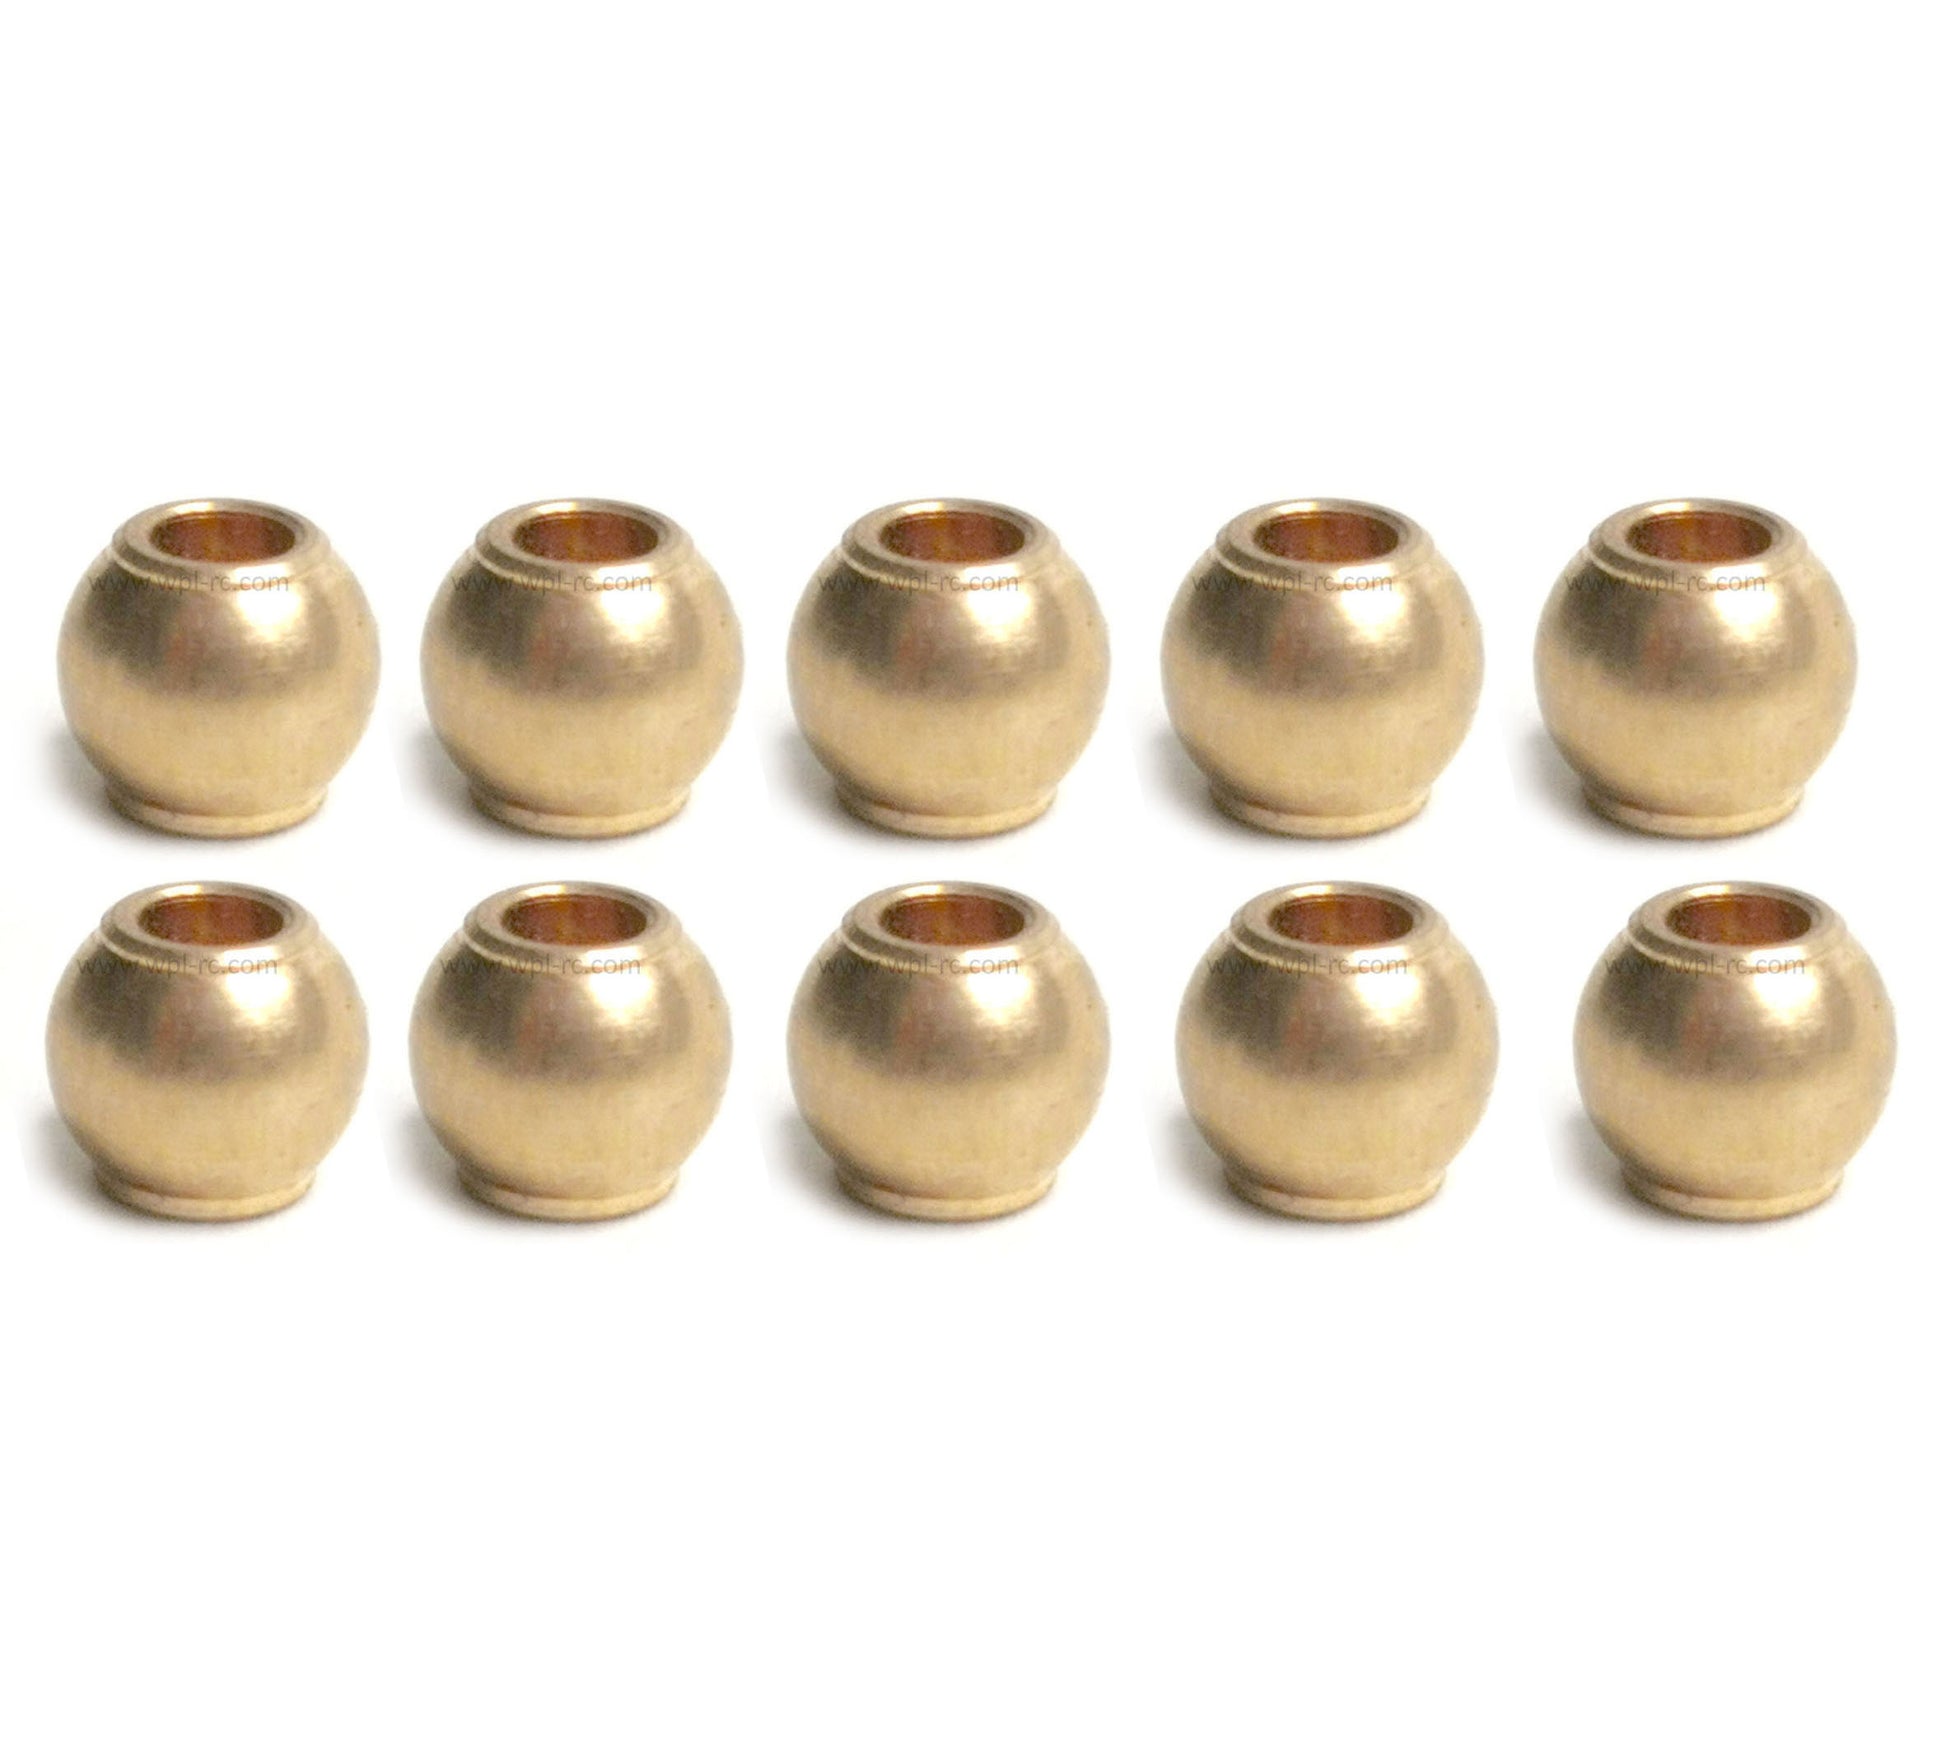 Brass Ball End - WPL RC Official Store